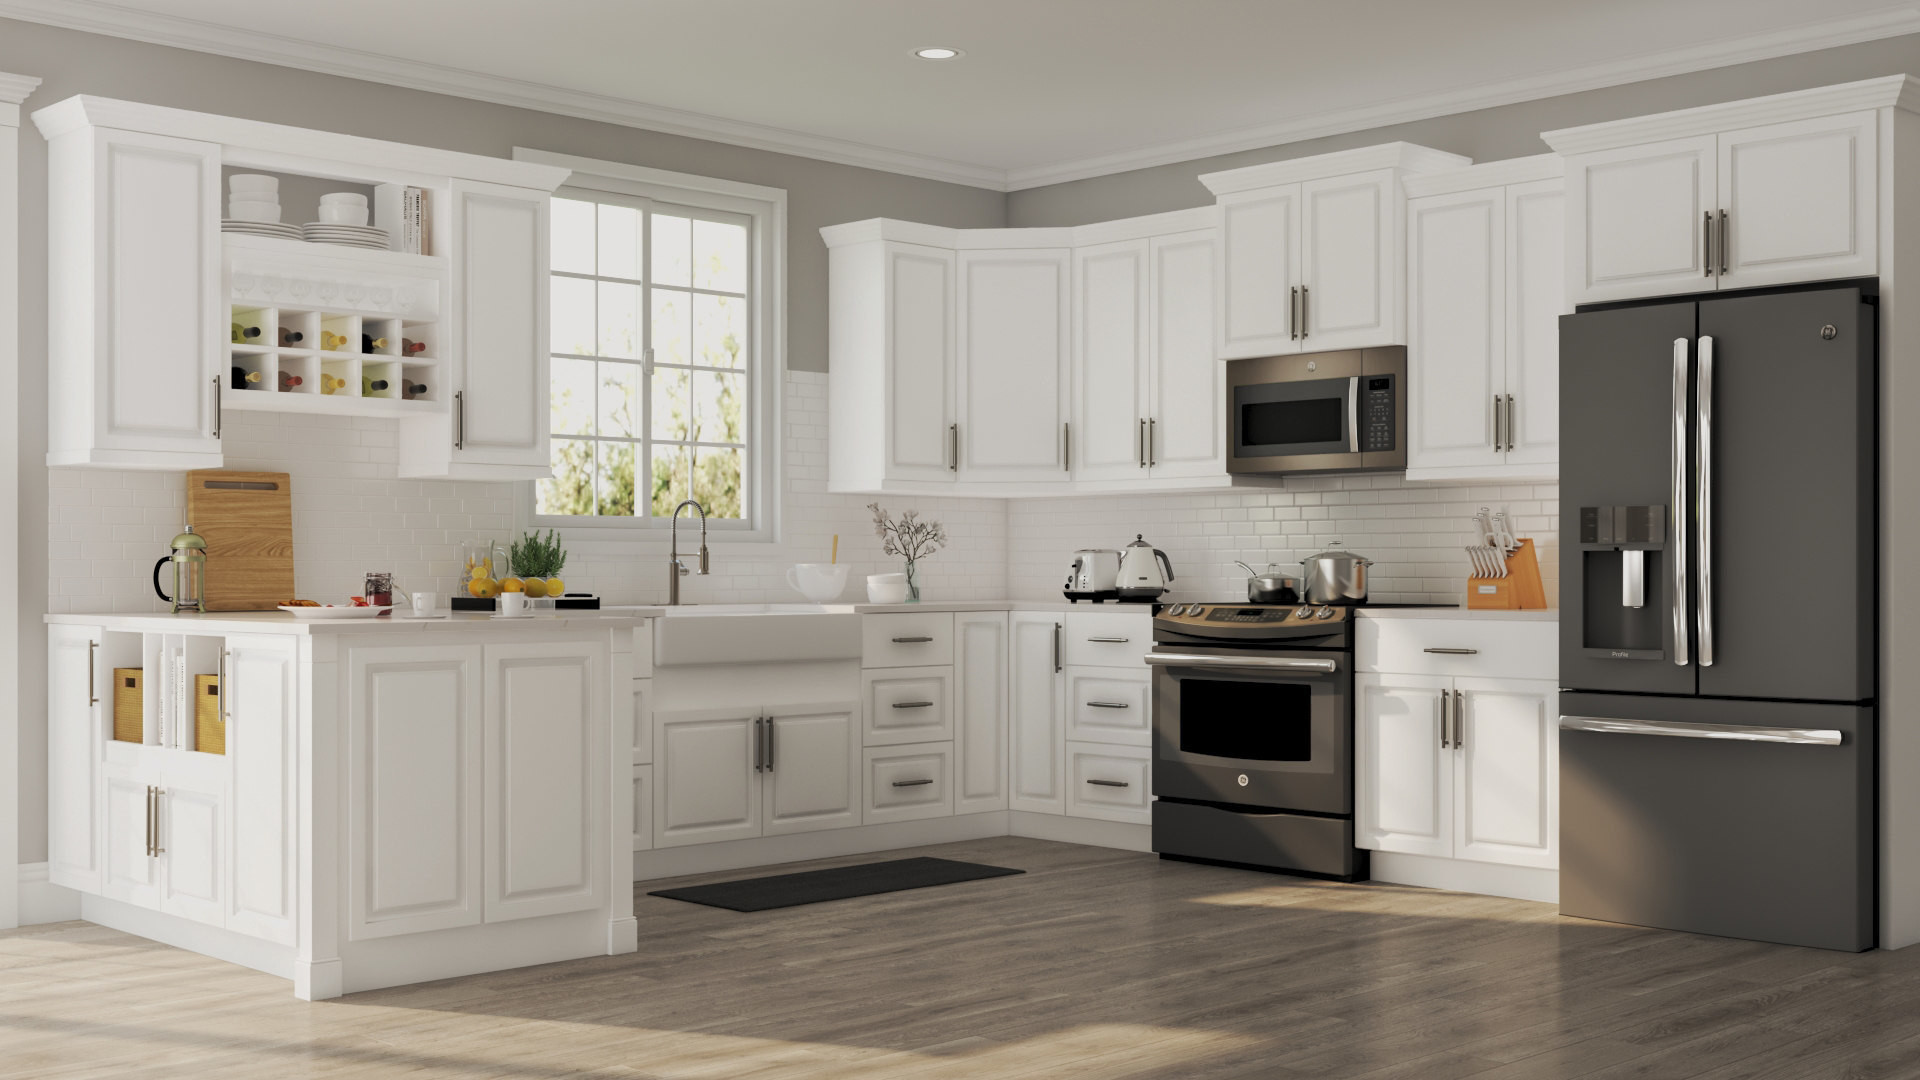 Homedepot Kitchen Cabinets
 Hampton Wall Cabinets in White – Kitchen – The Home Depot